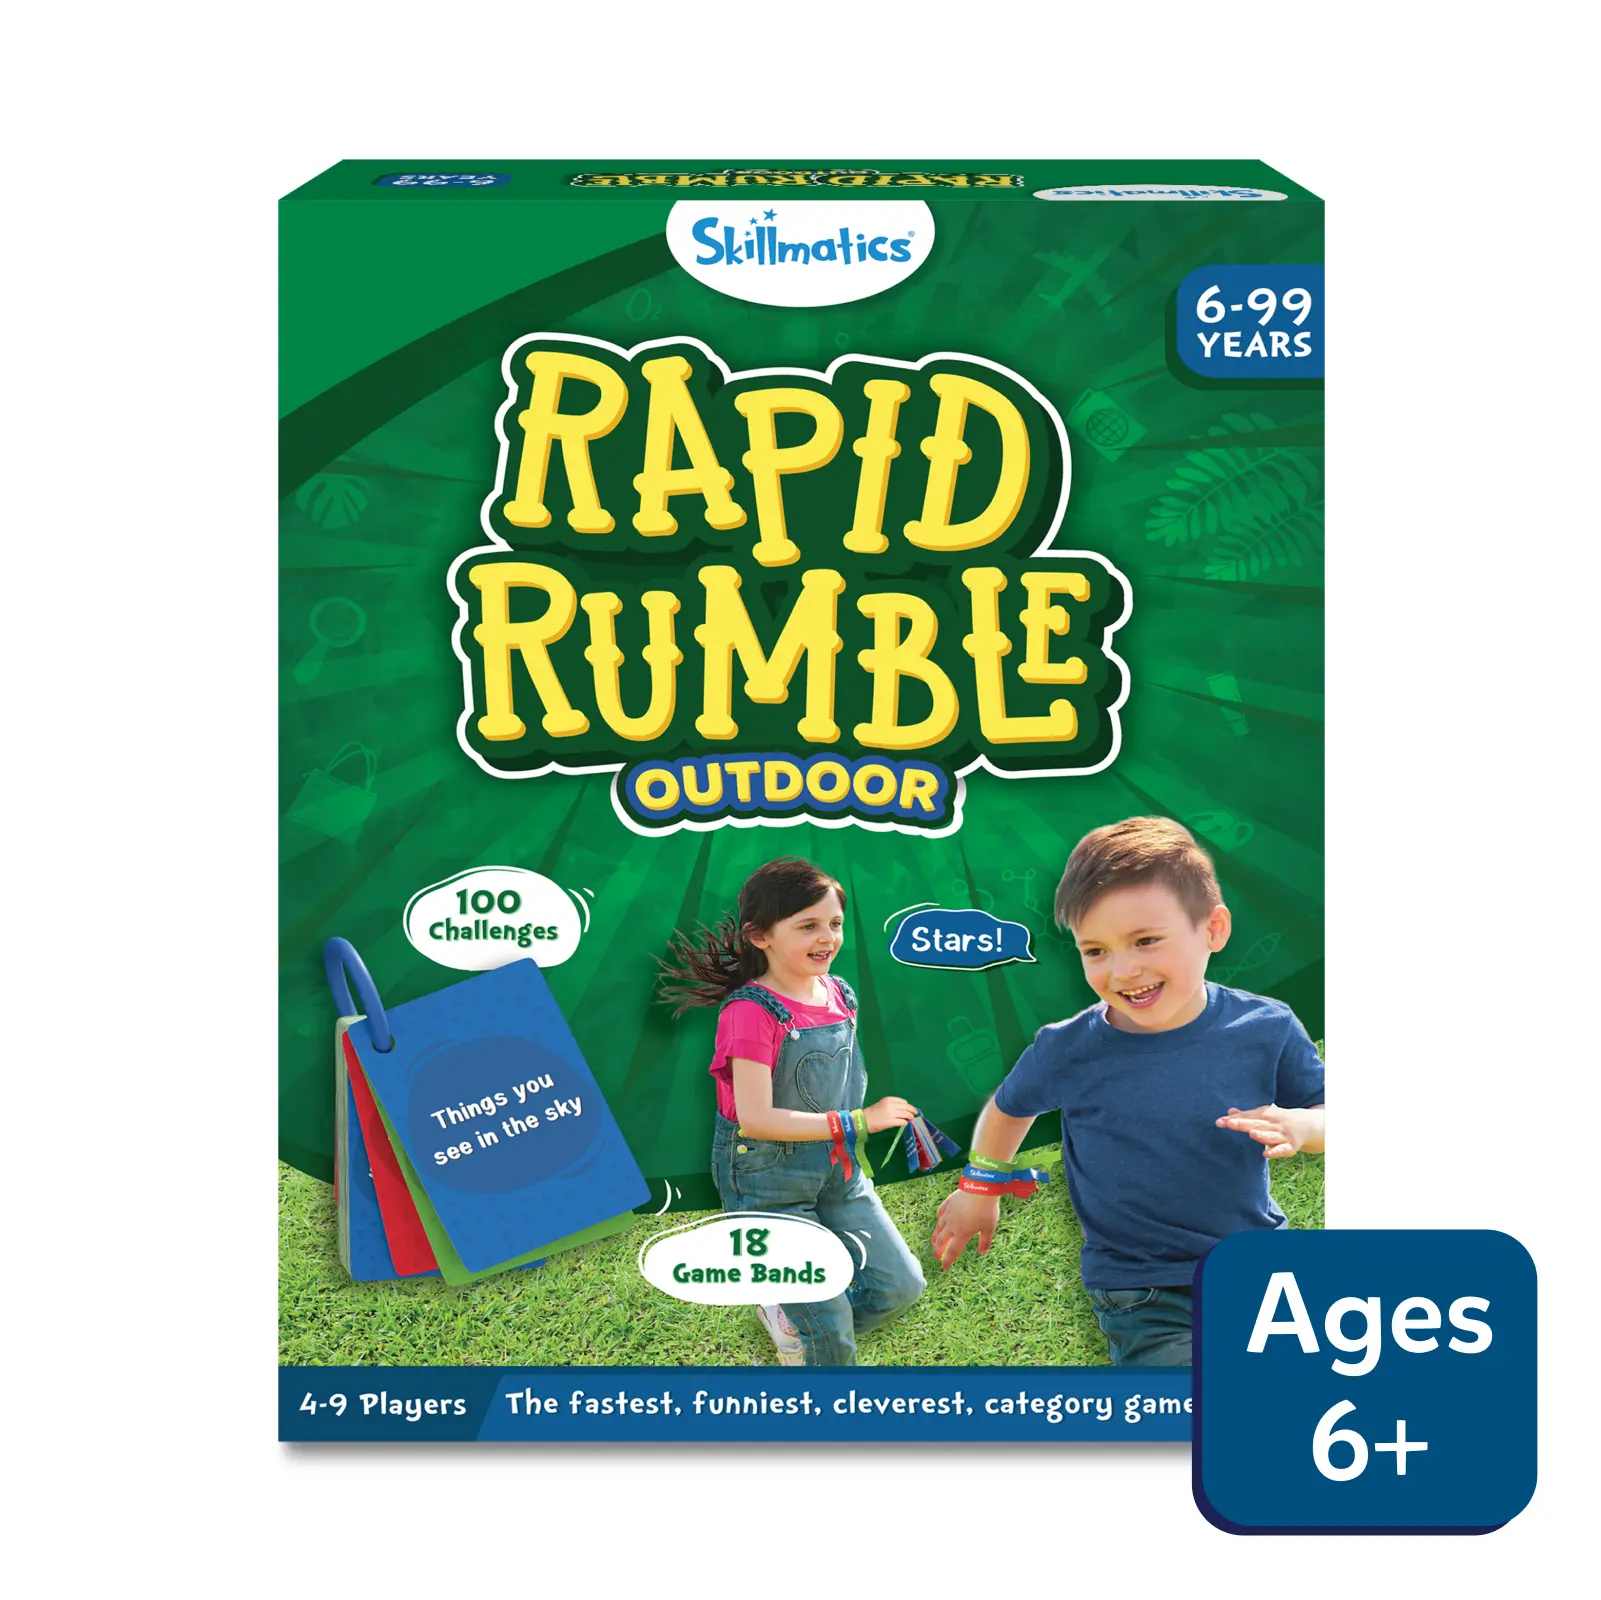 Rapid Rumble Outdoor | Educational & Clever Category Game of Tag (ages 6+)